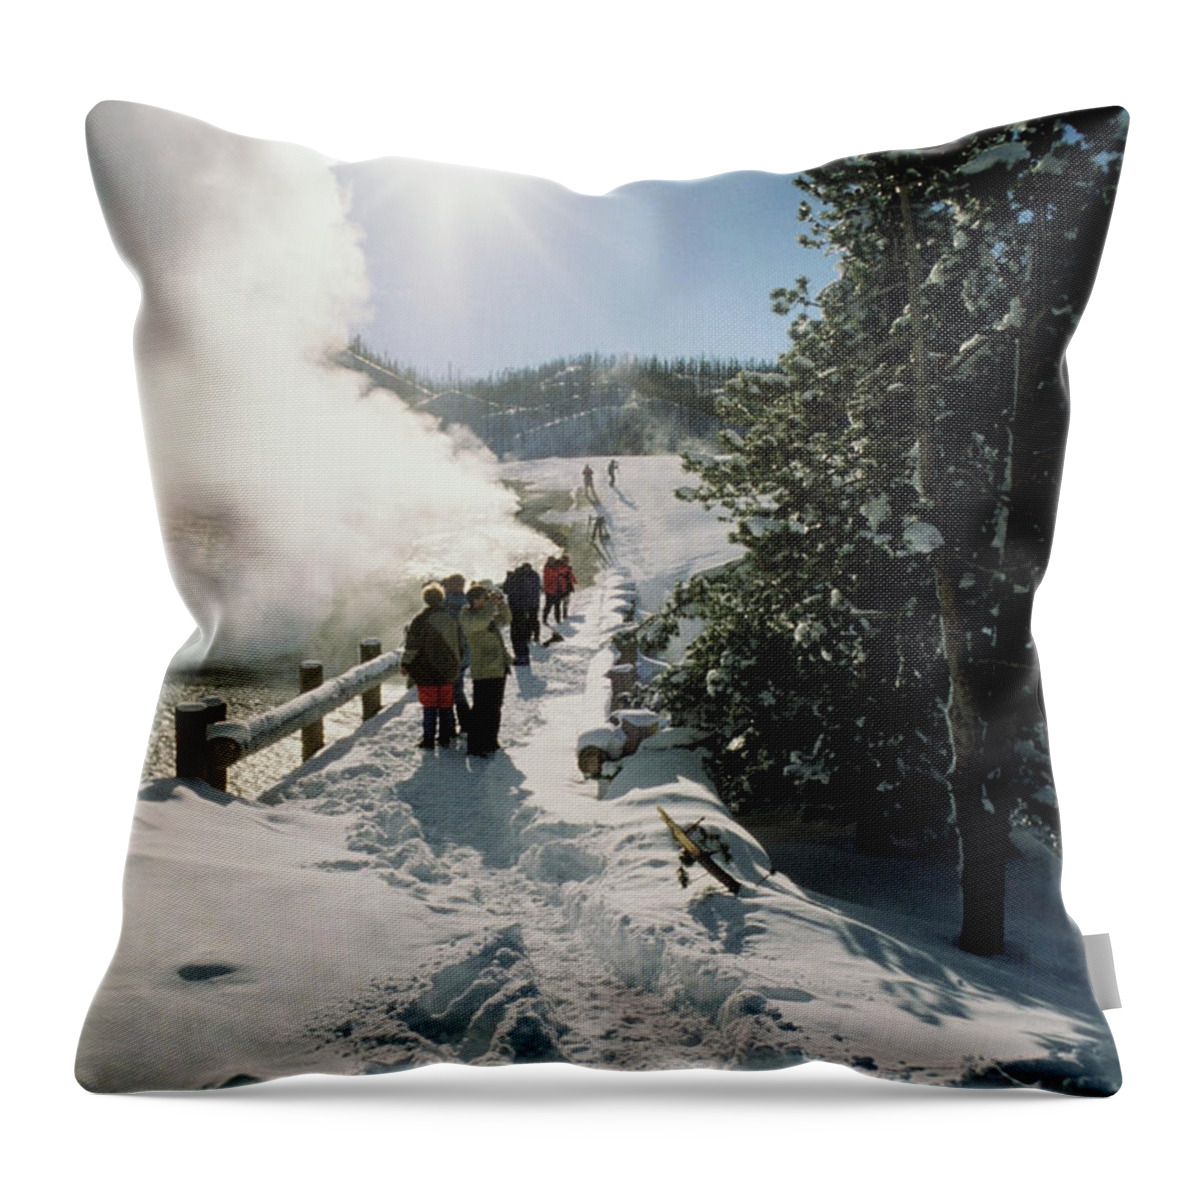 Geyser Throw Pillow featuring the photograph Tourists Watching A Geyser, Yellowstone by Medioimages/photodisc